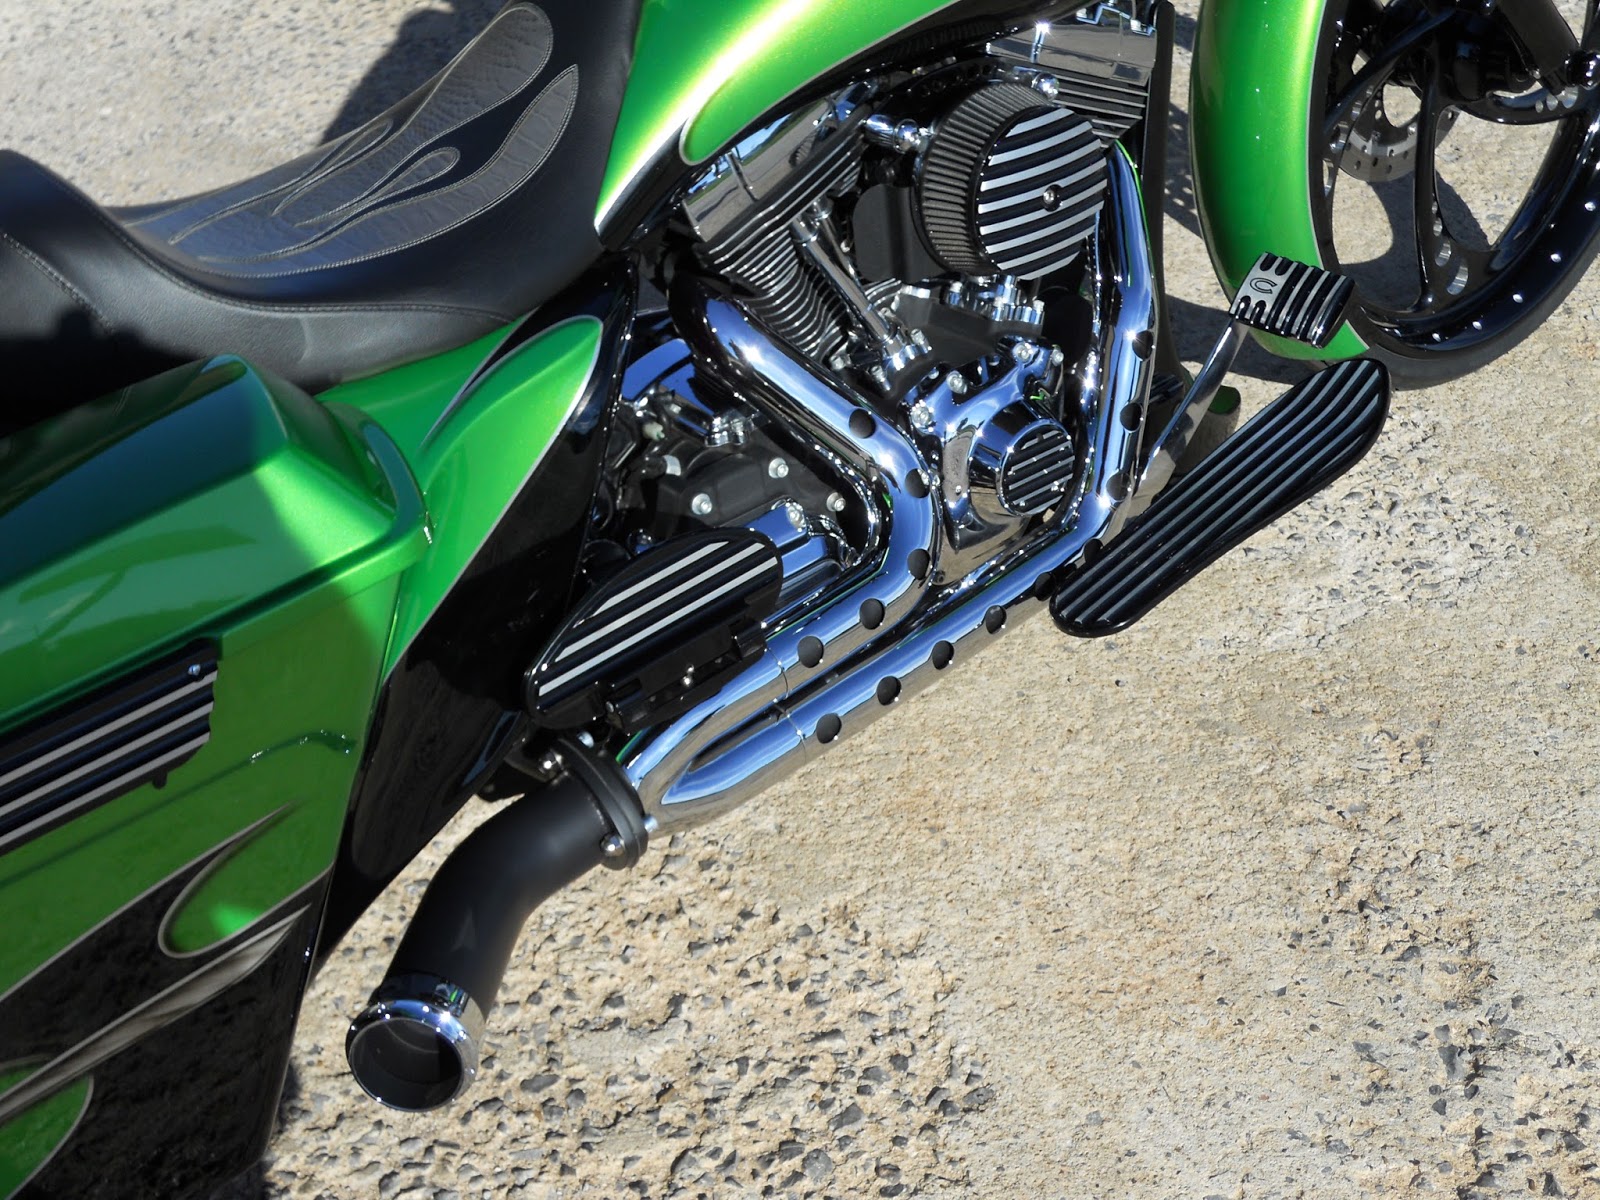 V-Twin News: New Covingtons Customs Destroyer “Hole Shot” Exhaust